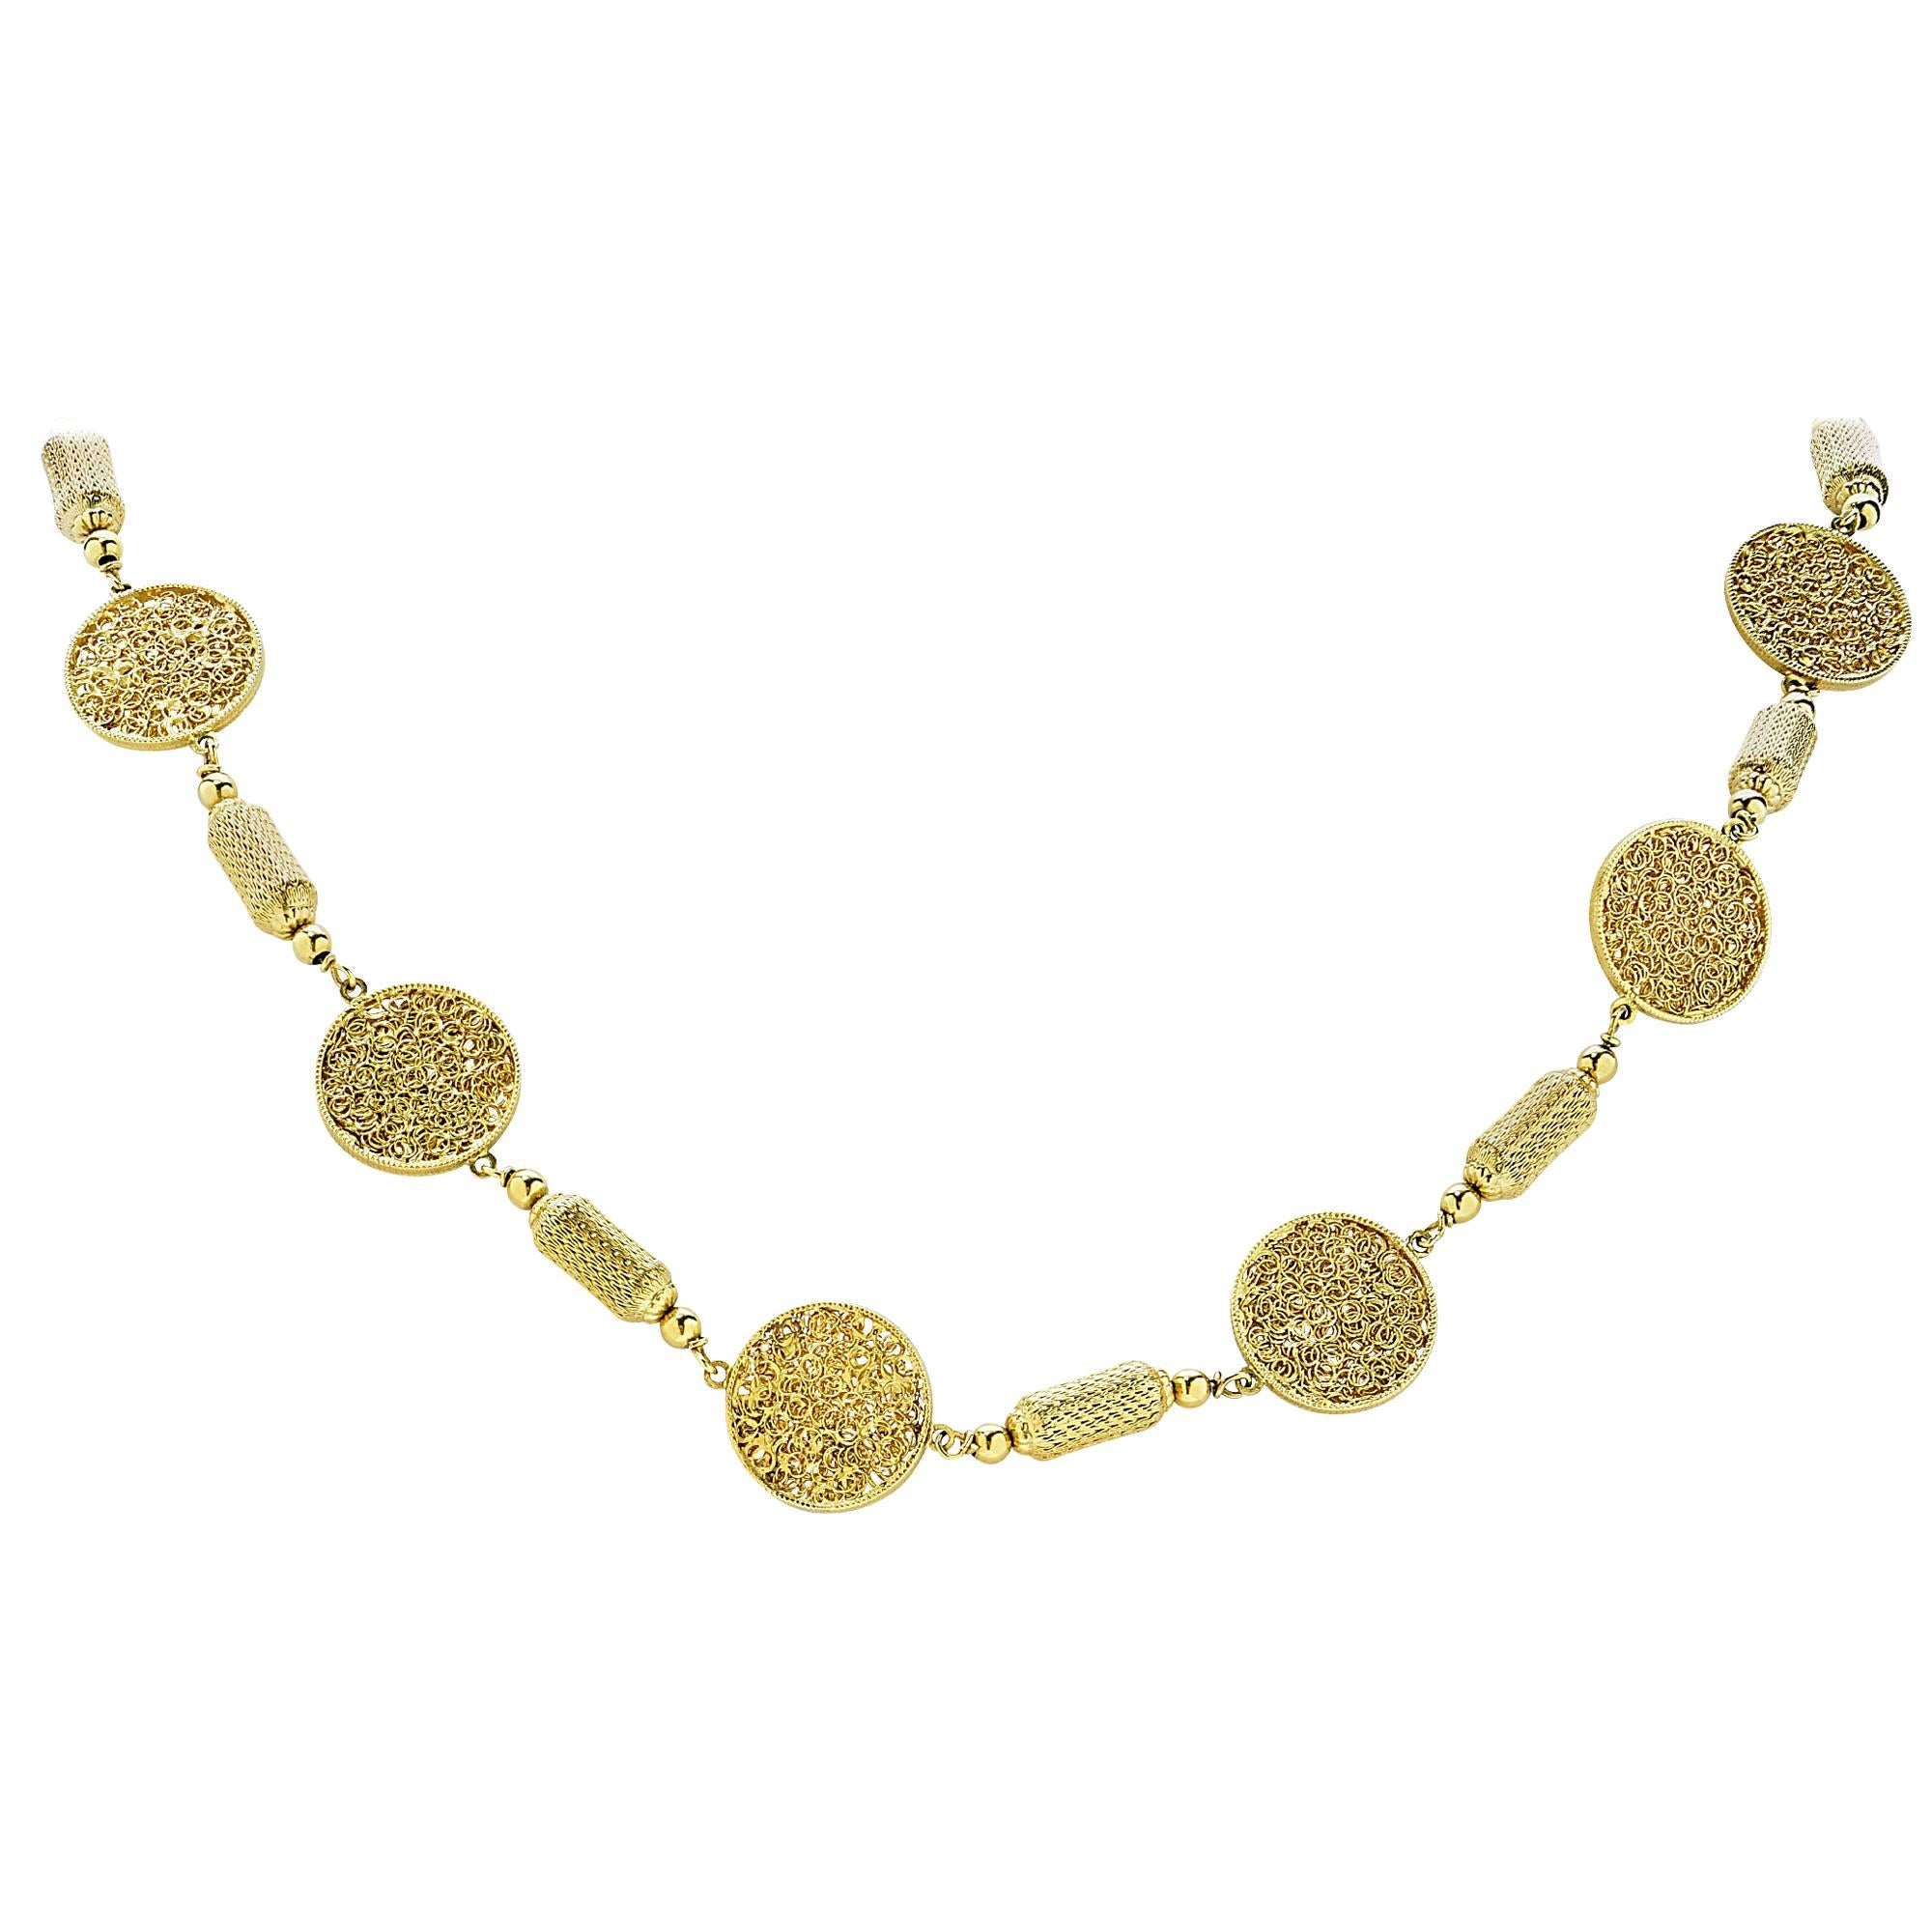  Yellow Gold Necklace